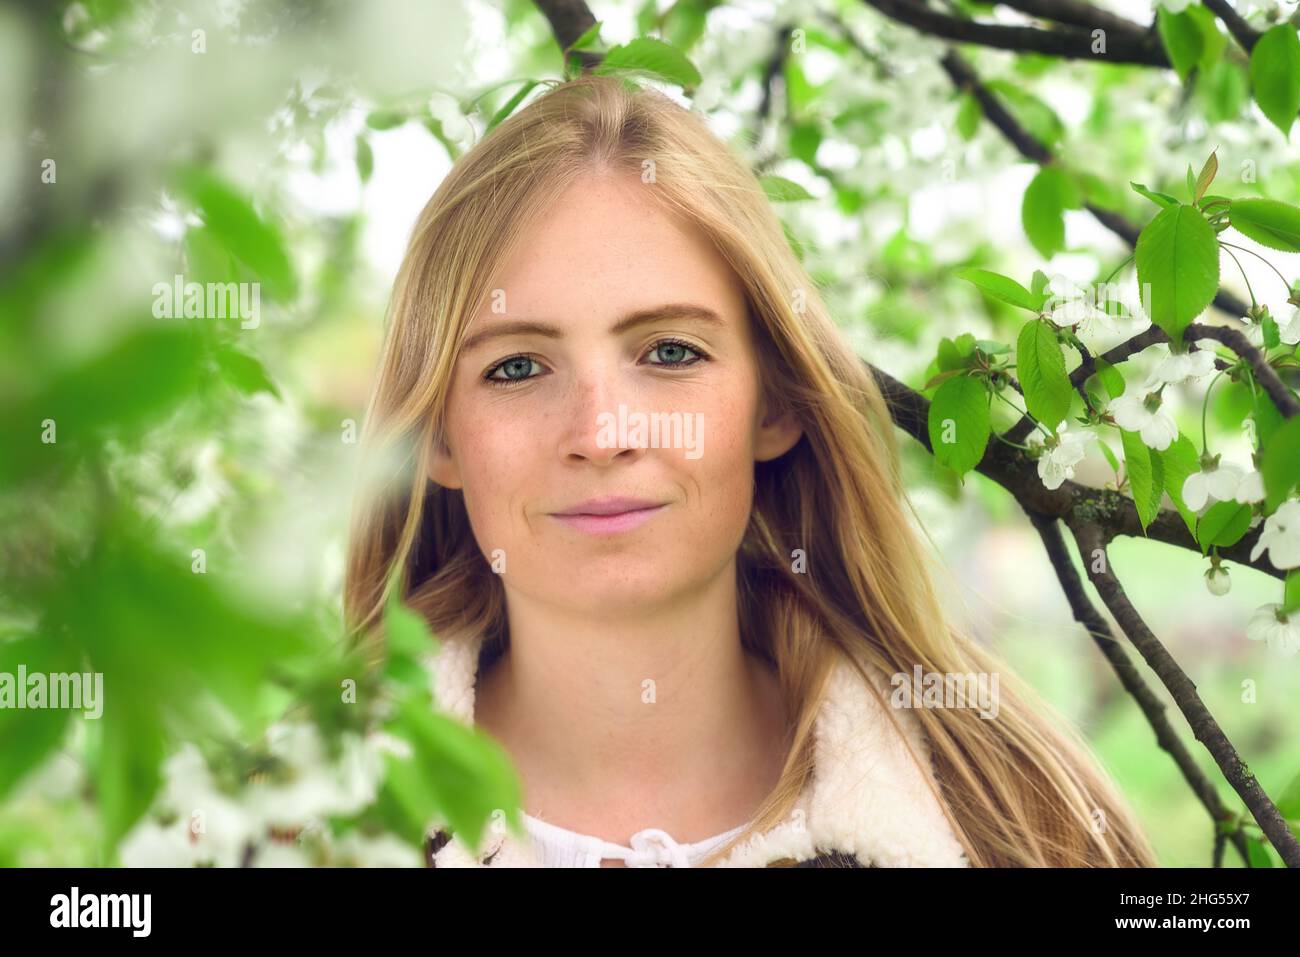 Portrait of a beautiful young woman in nature, with spring blossoms and tender green foliage on tree branches surrounding her face Stock Photo